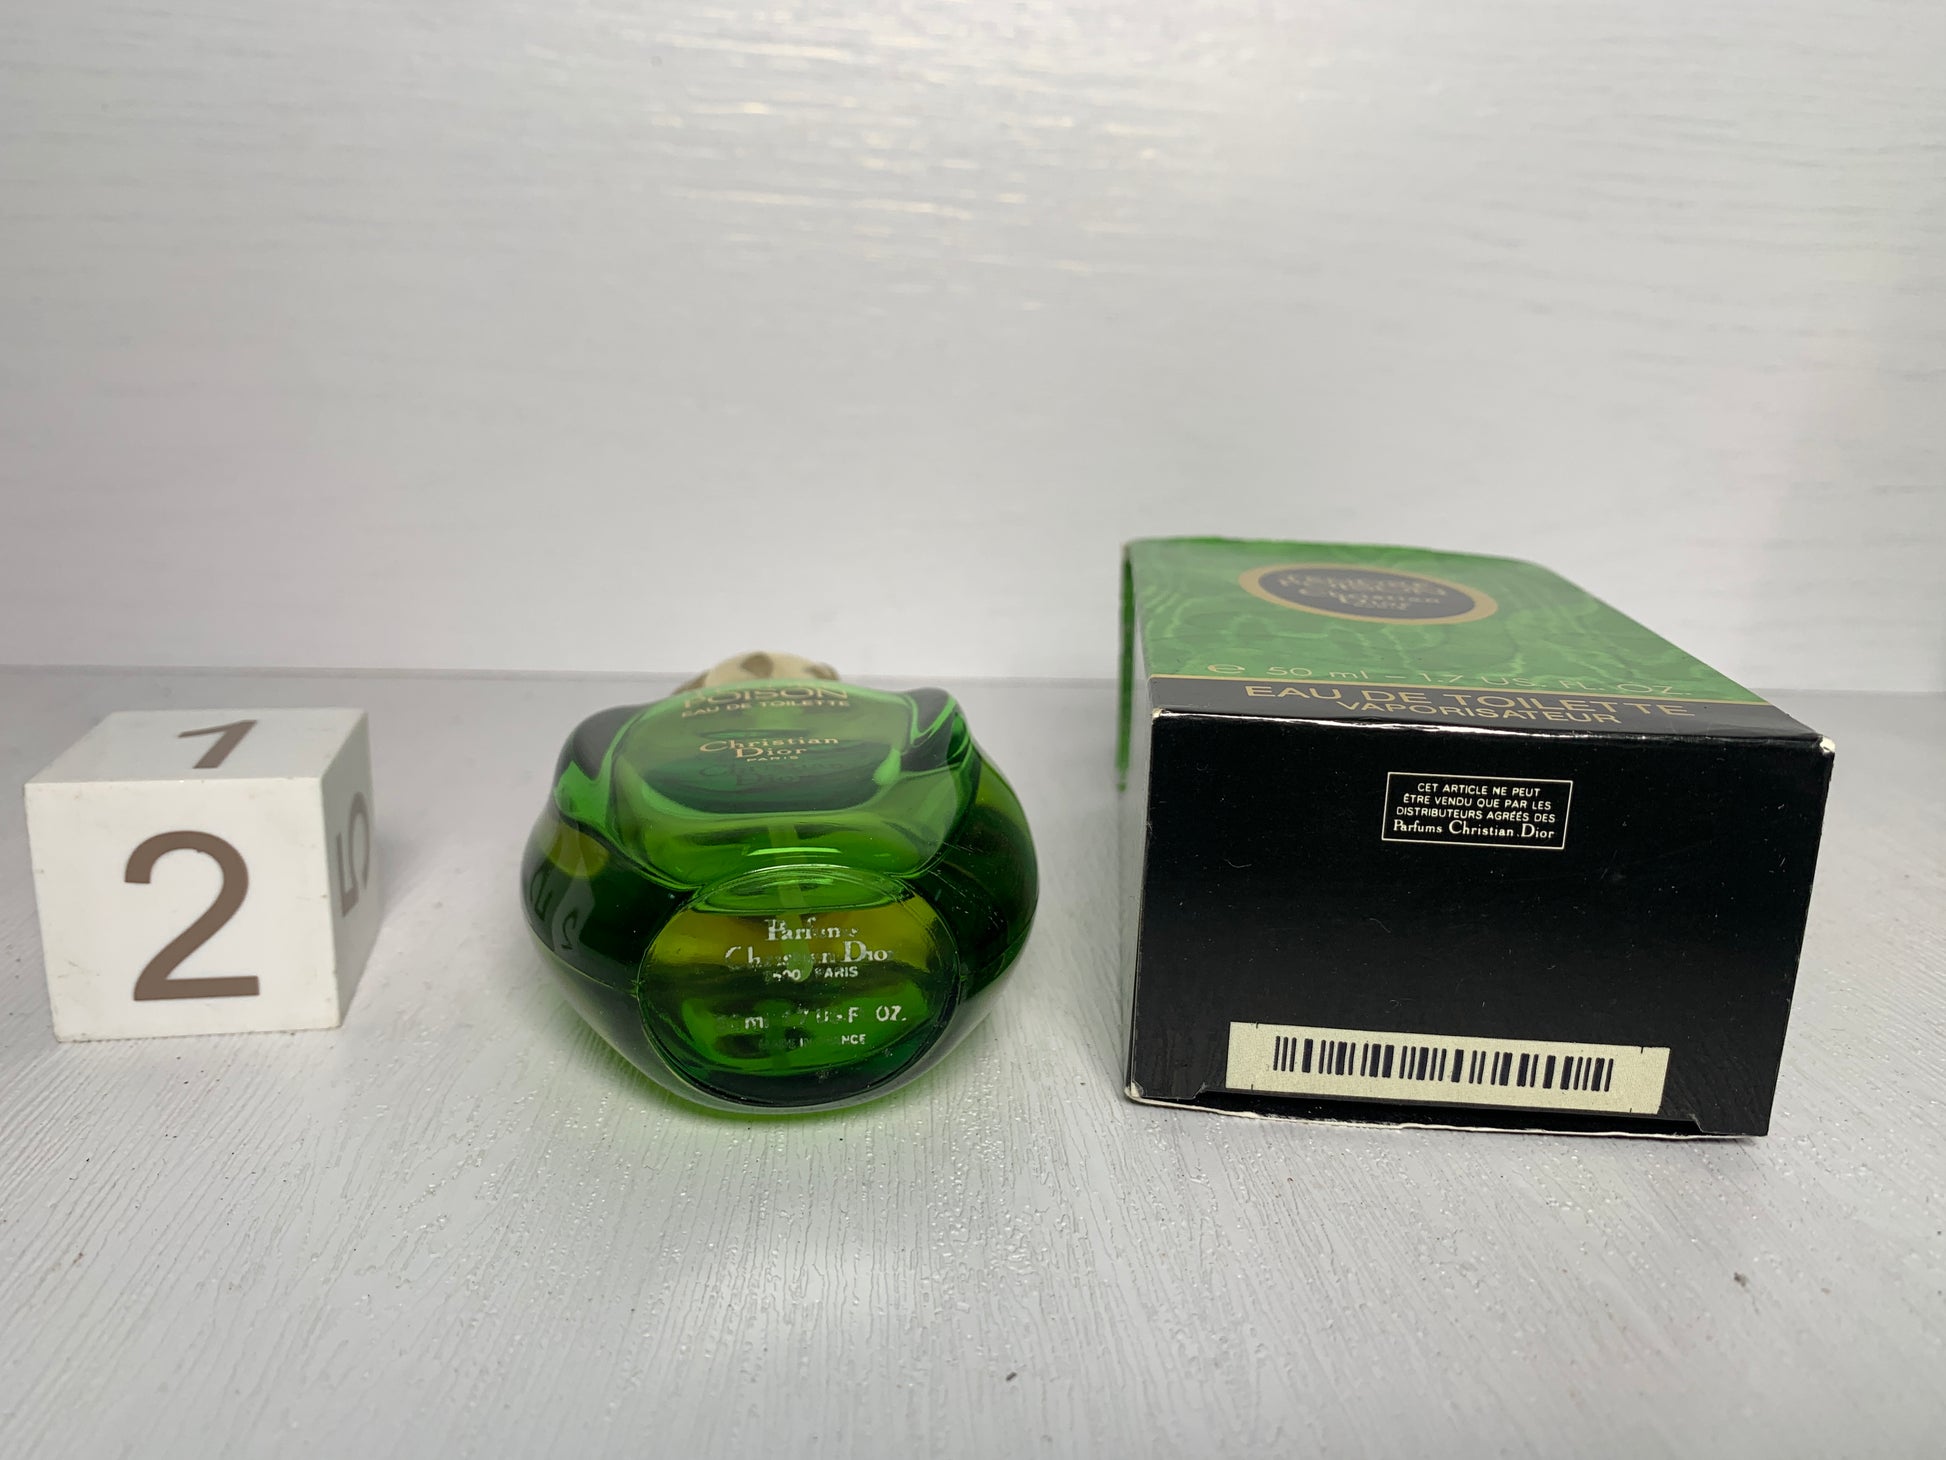 TENDRE POISON by CHRISTIAN DIOR miniature EDT 5 ml~.17 oz